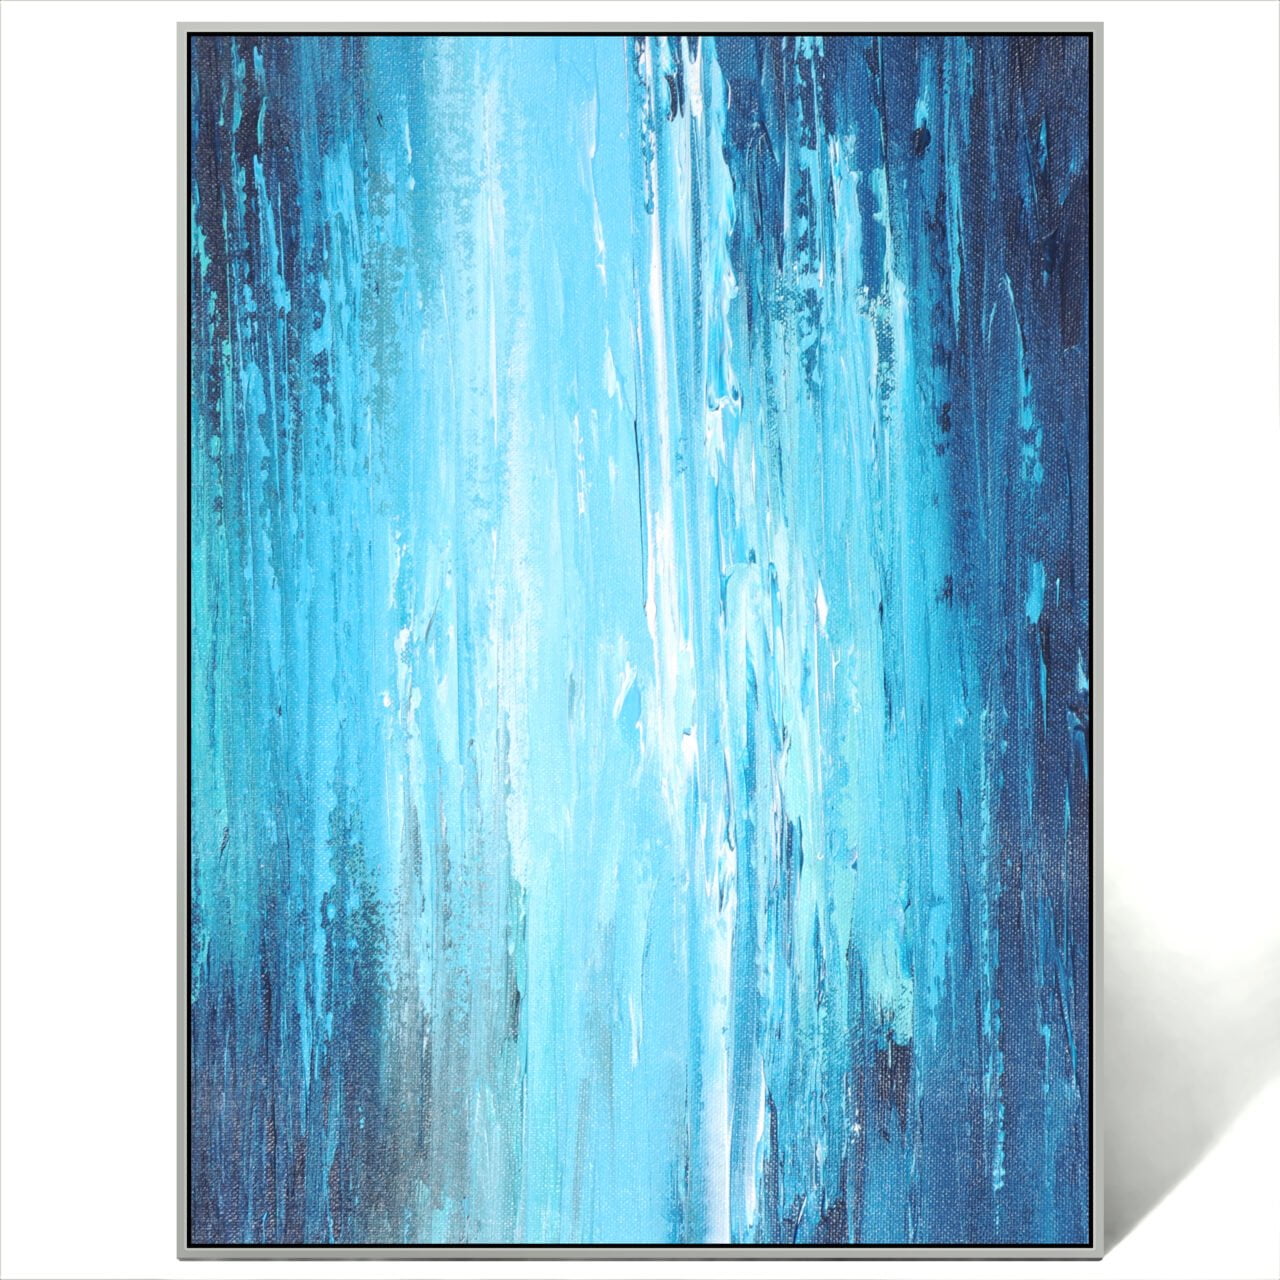 Large Blue Ocean Wall Art Canvas Abstract Wall Painting